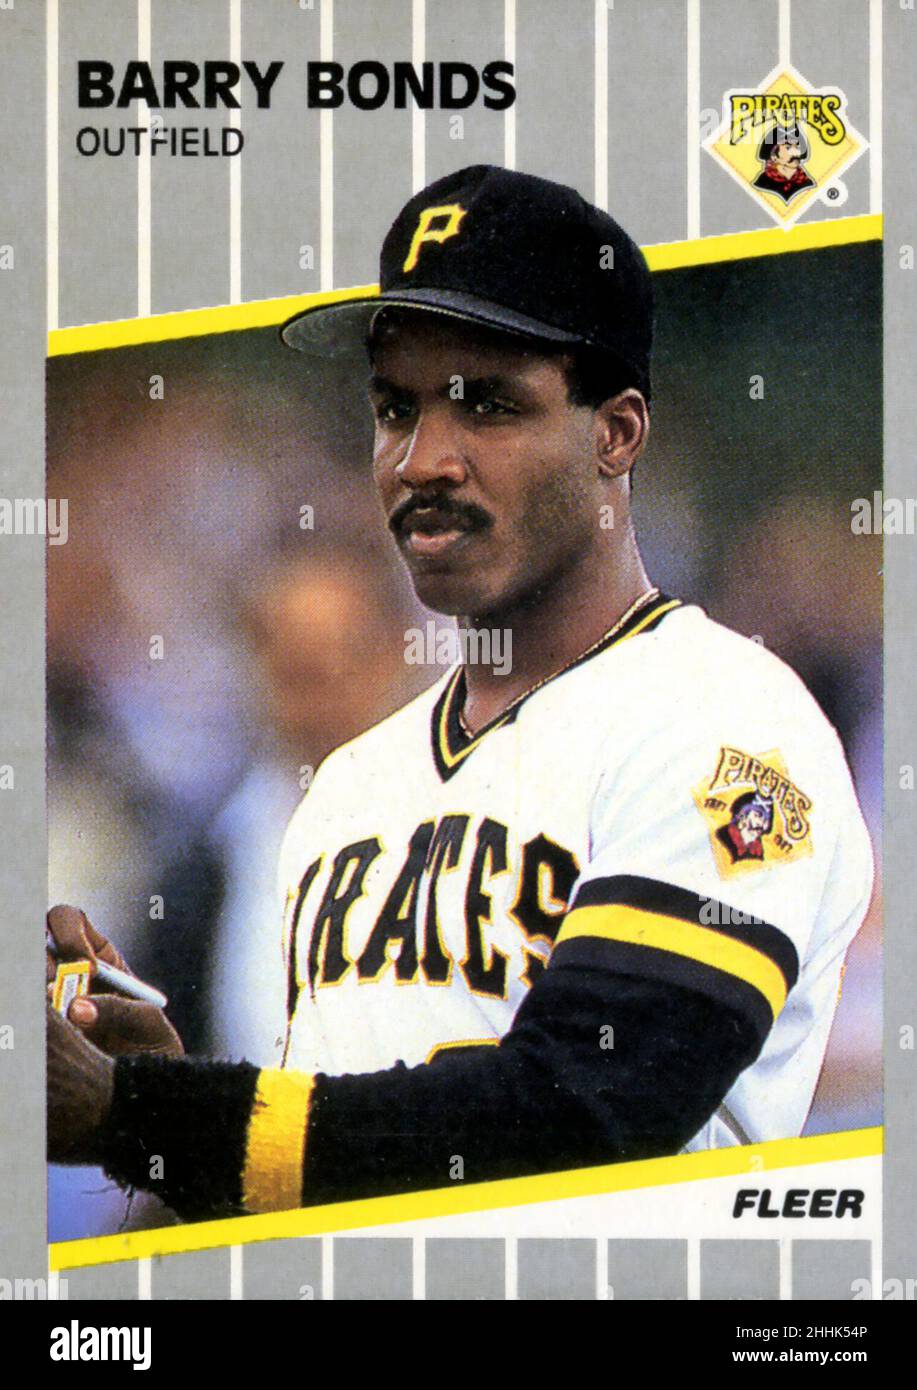 1989 Fleer baseball card of Barry Bonds with the Pittsburgh Pirates. Stock Photo